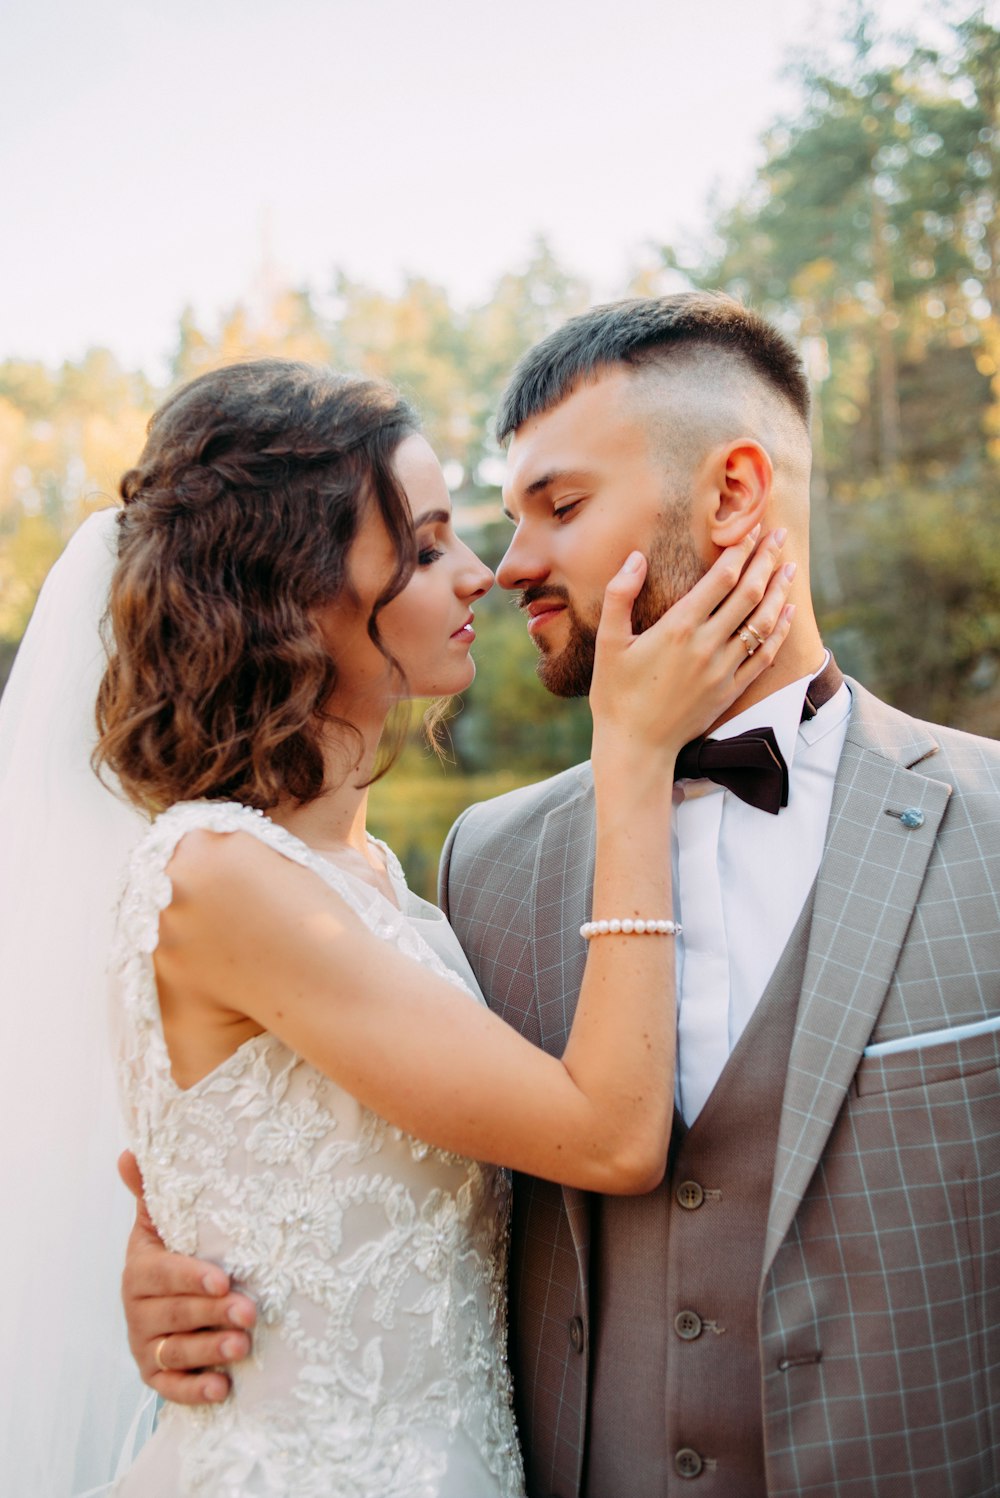 woman in wedding dress holding a man's right chin with both about to kiss each other